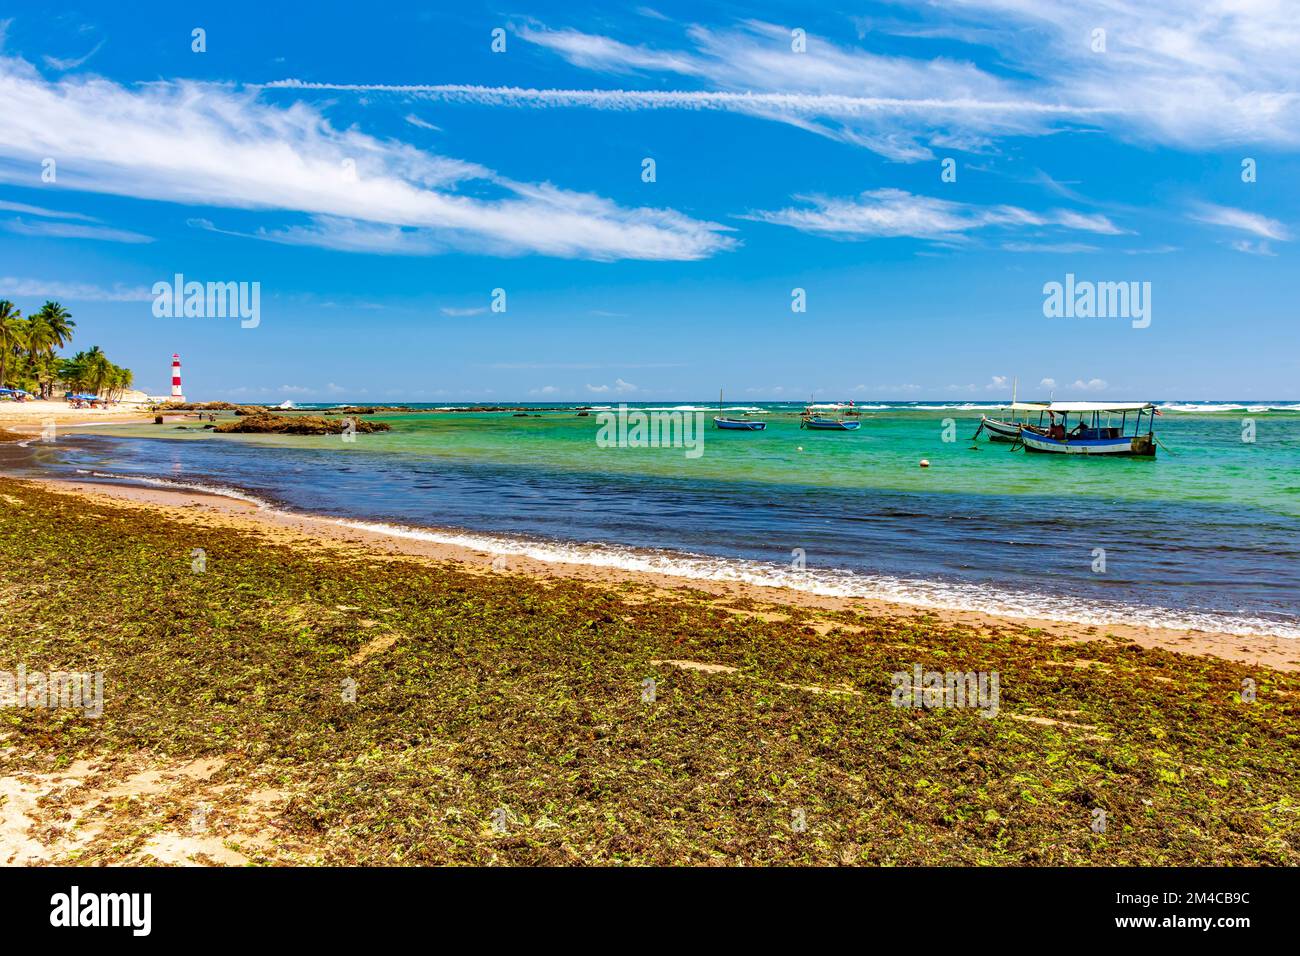 Itapua beach and lighthouse, one of the most beautiful and well-known landscapes in the city of Salvador in Bahia with its anchored fishing boats Stock Photo